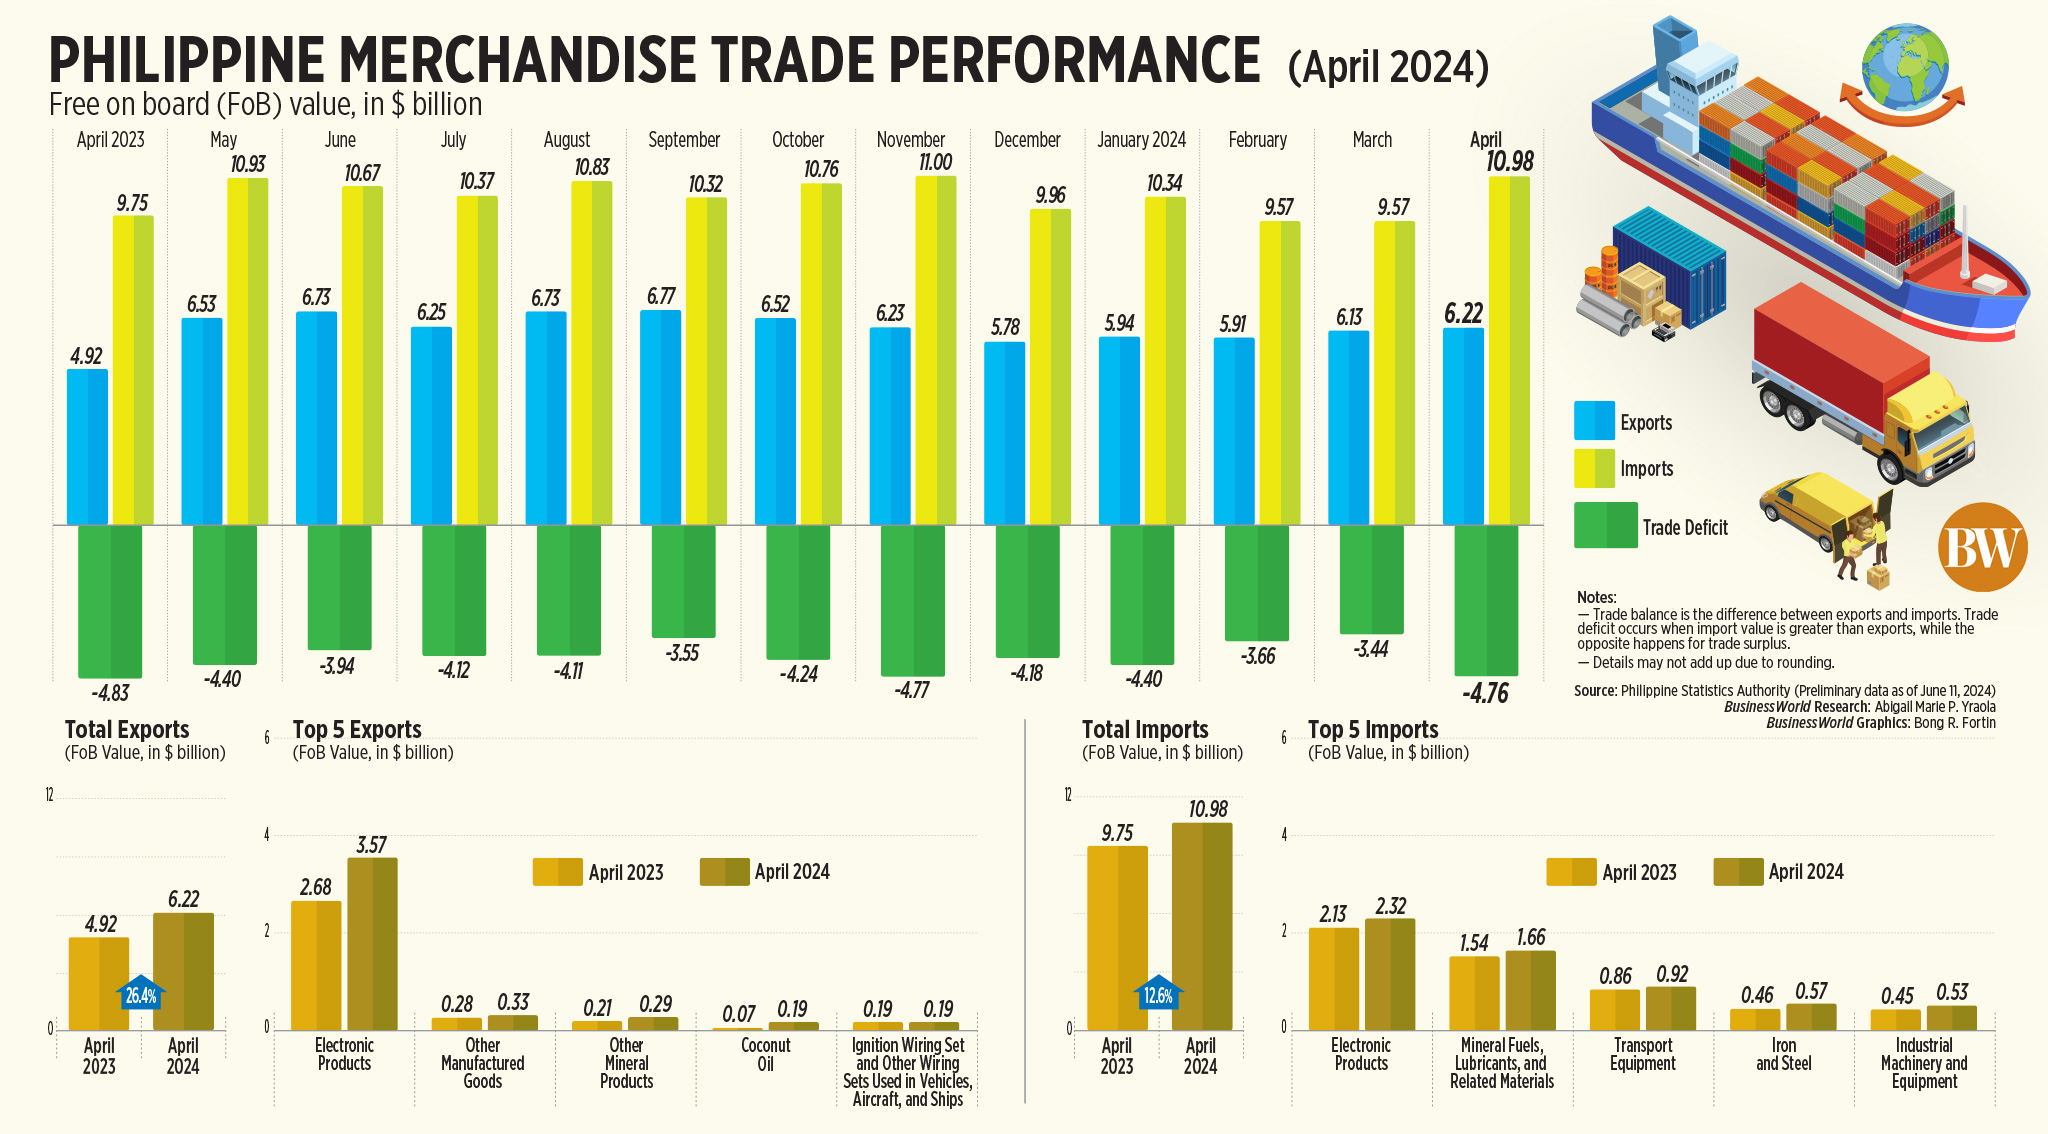 Philippine Trade Performance for Goods (April 2024)